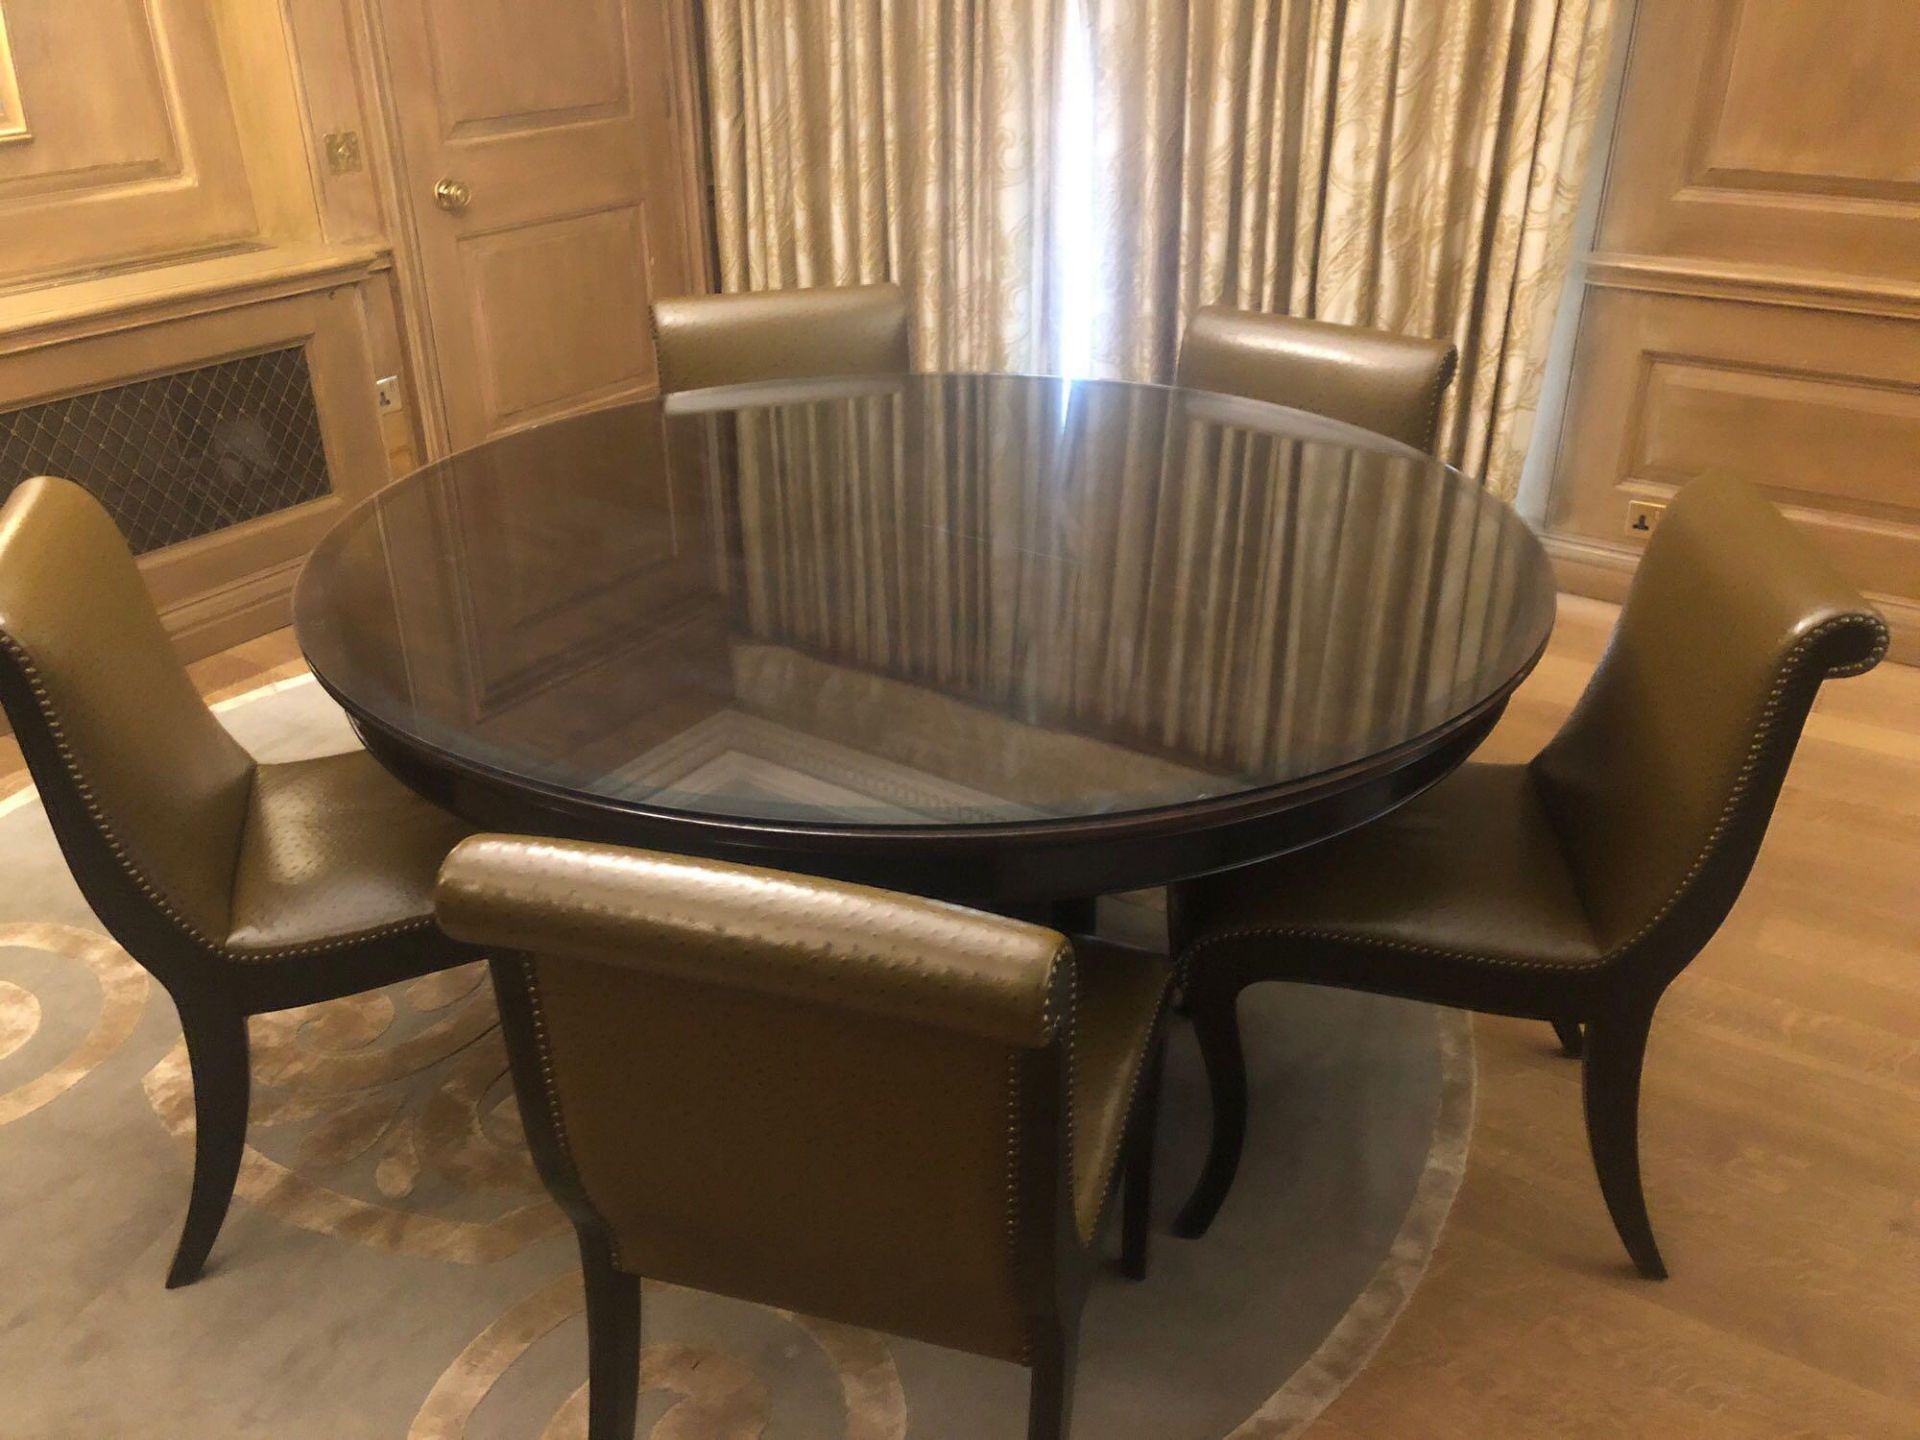 Circular Mahogany Dining Table With Protective Glass Top 59 x 77 Complete With 5 x Leather